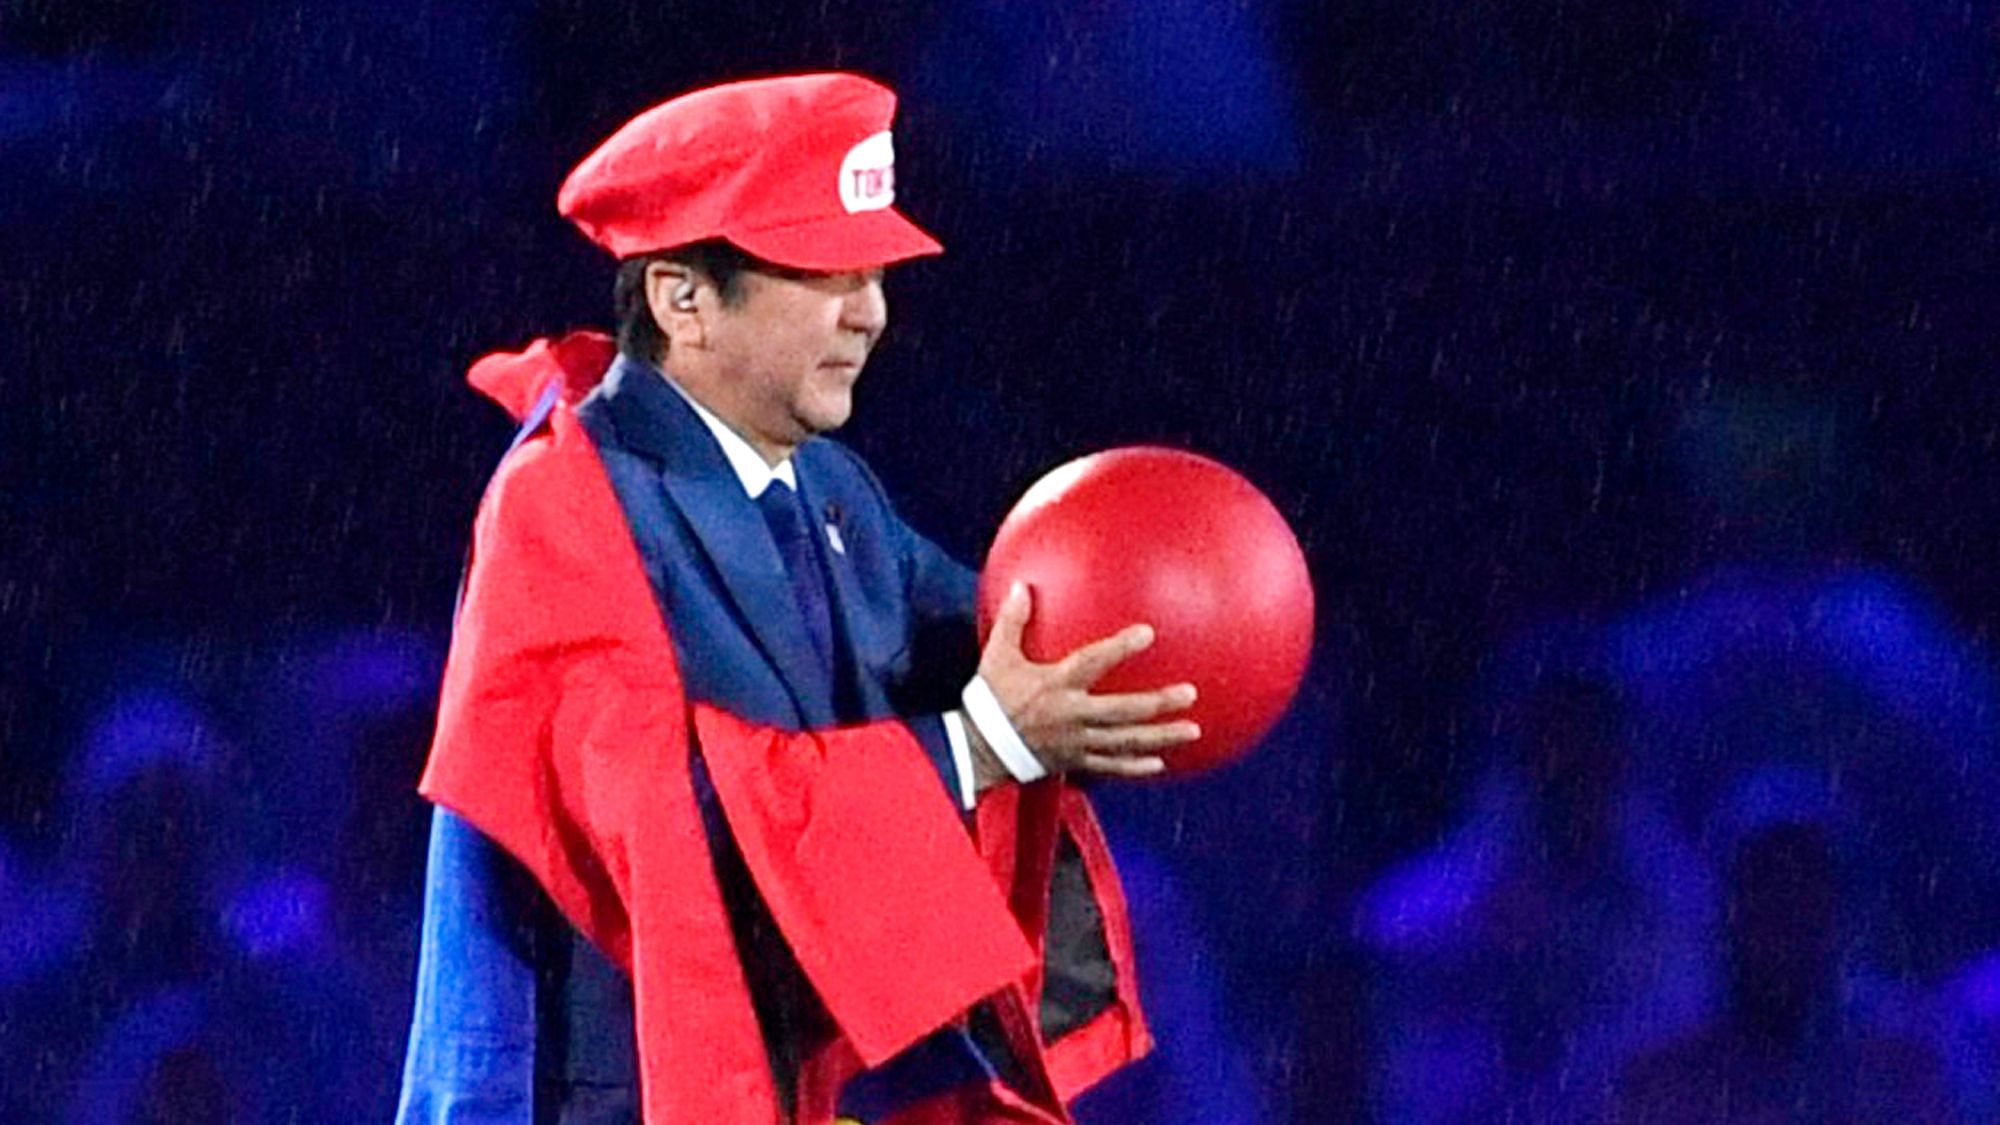 In this Aug. 21, 2016, file photo, Japanese Prime Minister Shinzo Abe appears as the Nintendo game character Super Mario during the closing ceremony at the 2016 Summer Olympics in Rio de Janeiro, Brazil.&nbsp;